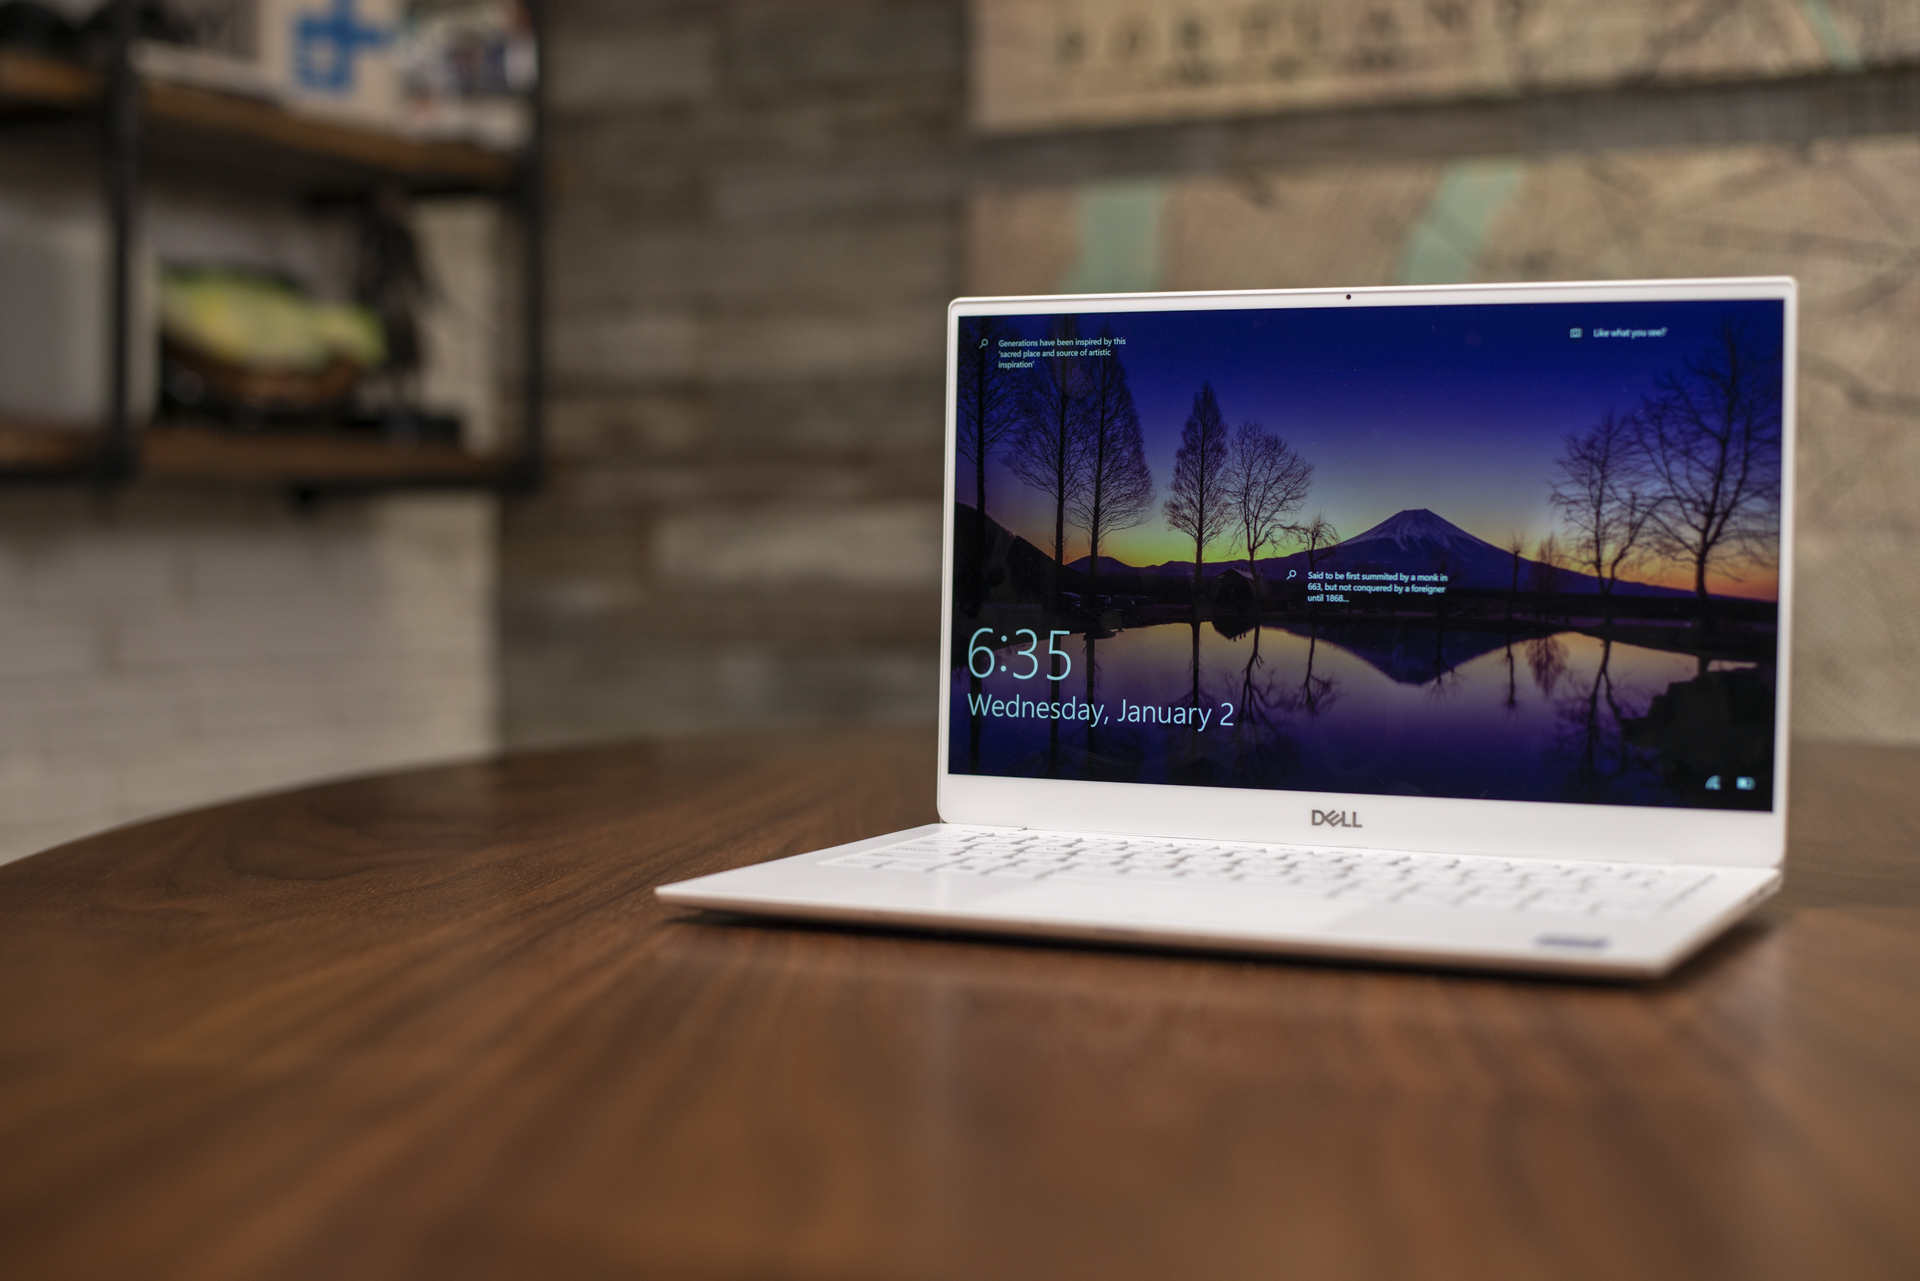 Dell XPS 13 (2019) Review: A Near-Perfect Laptop | Digital Trends